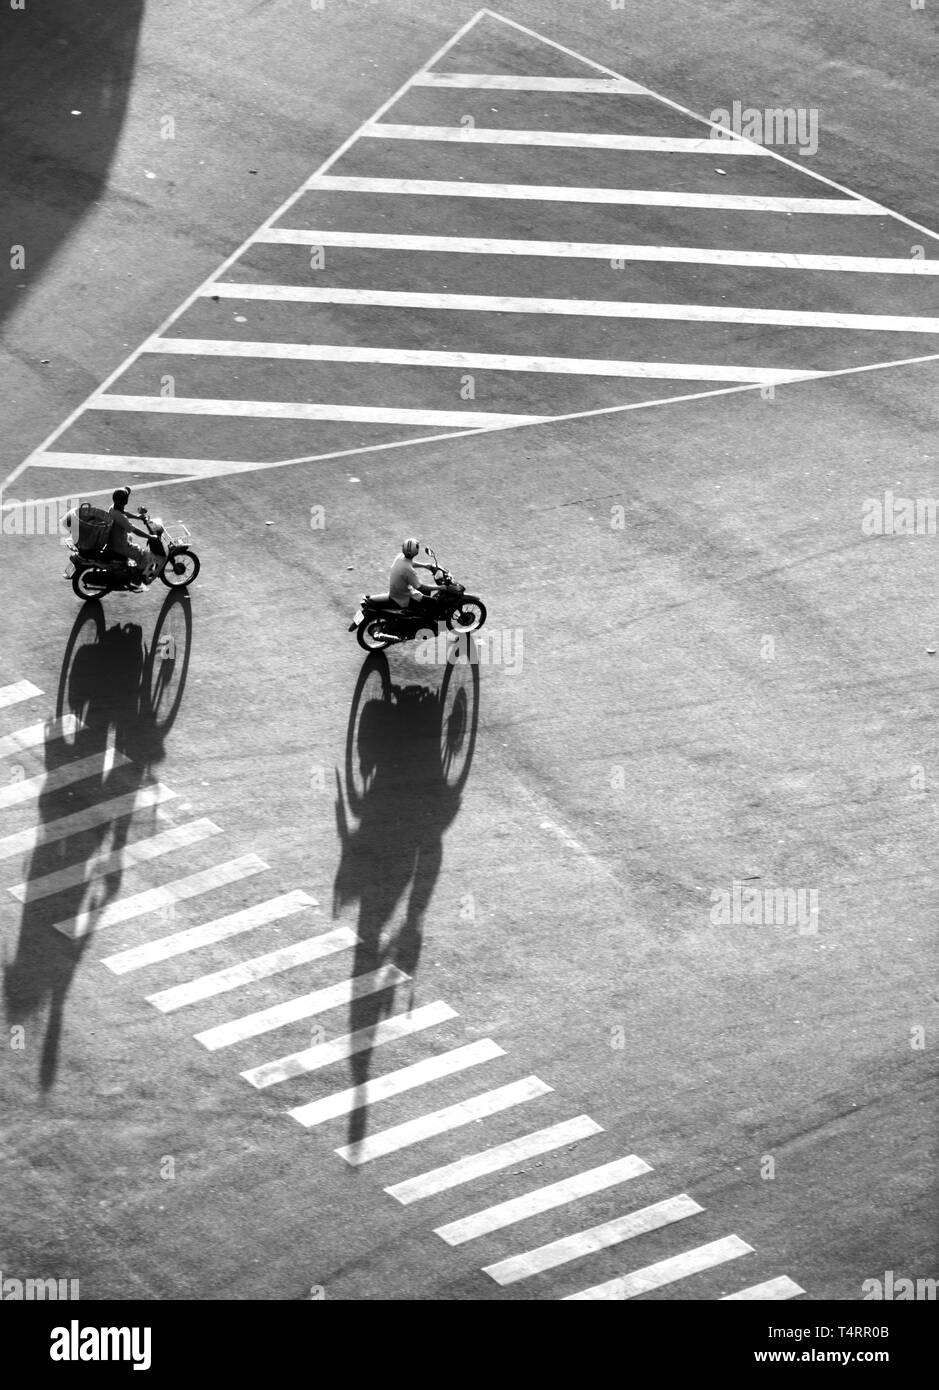 Amazing high view scene on street at Asian city, group of Vietnamese people ride motorcycles moving with shadow on road surface make impression shape Stock Photo